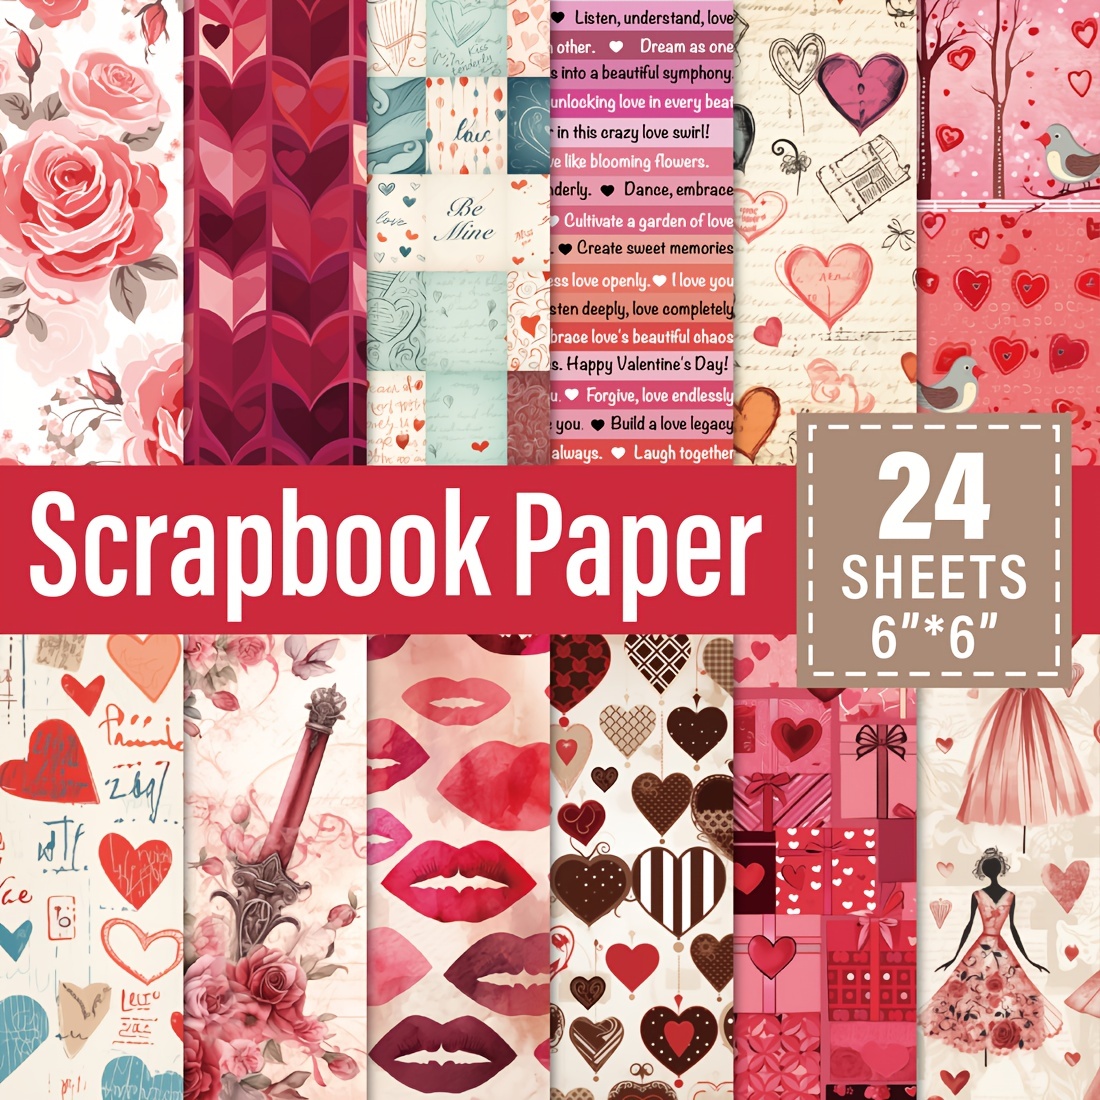 Love Valentines Day Scrapbook Paper: 8x8 Cute Love Theme Designer Paper for Decorative Art, DIY Projects, Homemade Crafts, Cool Art Ideas [Book]